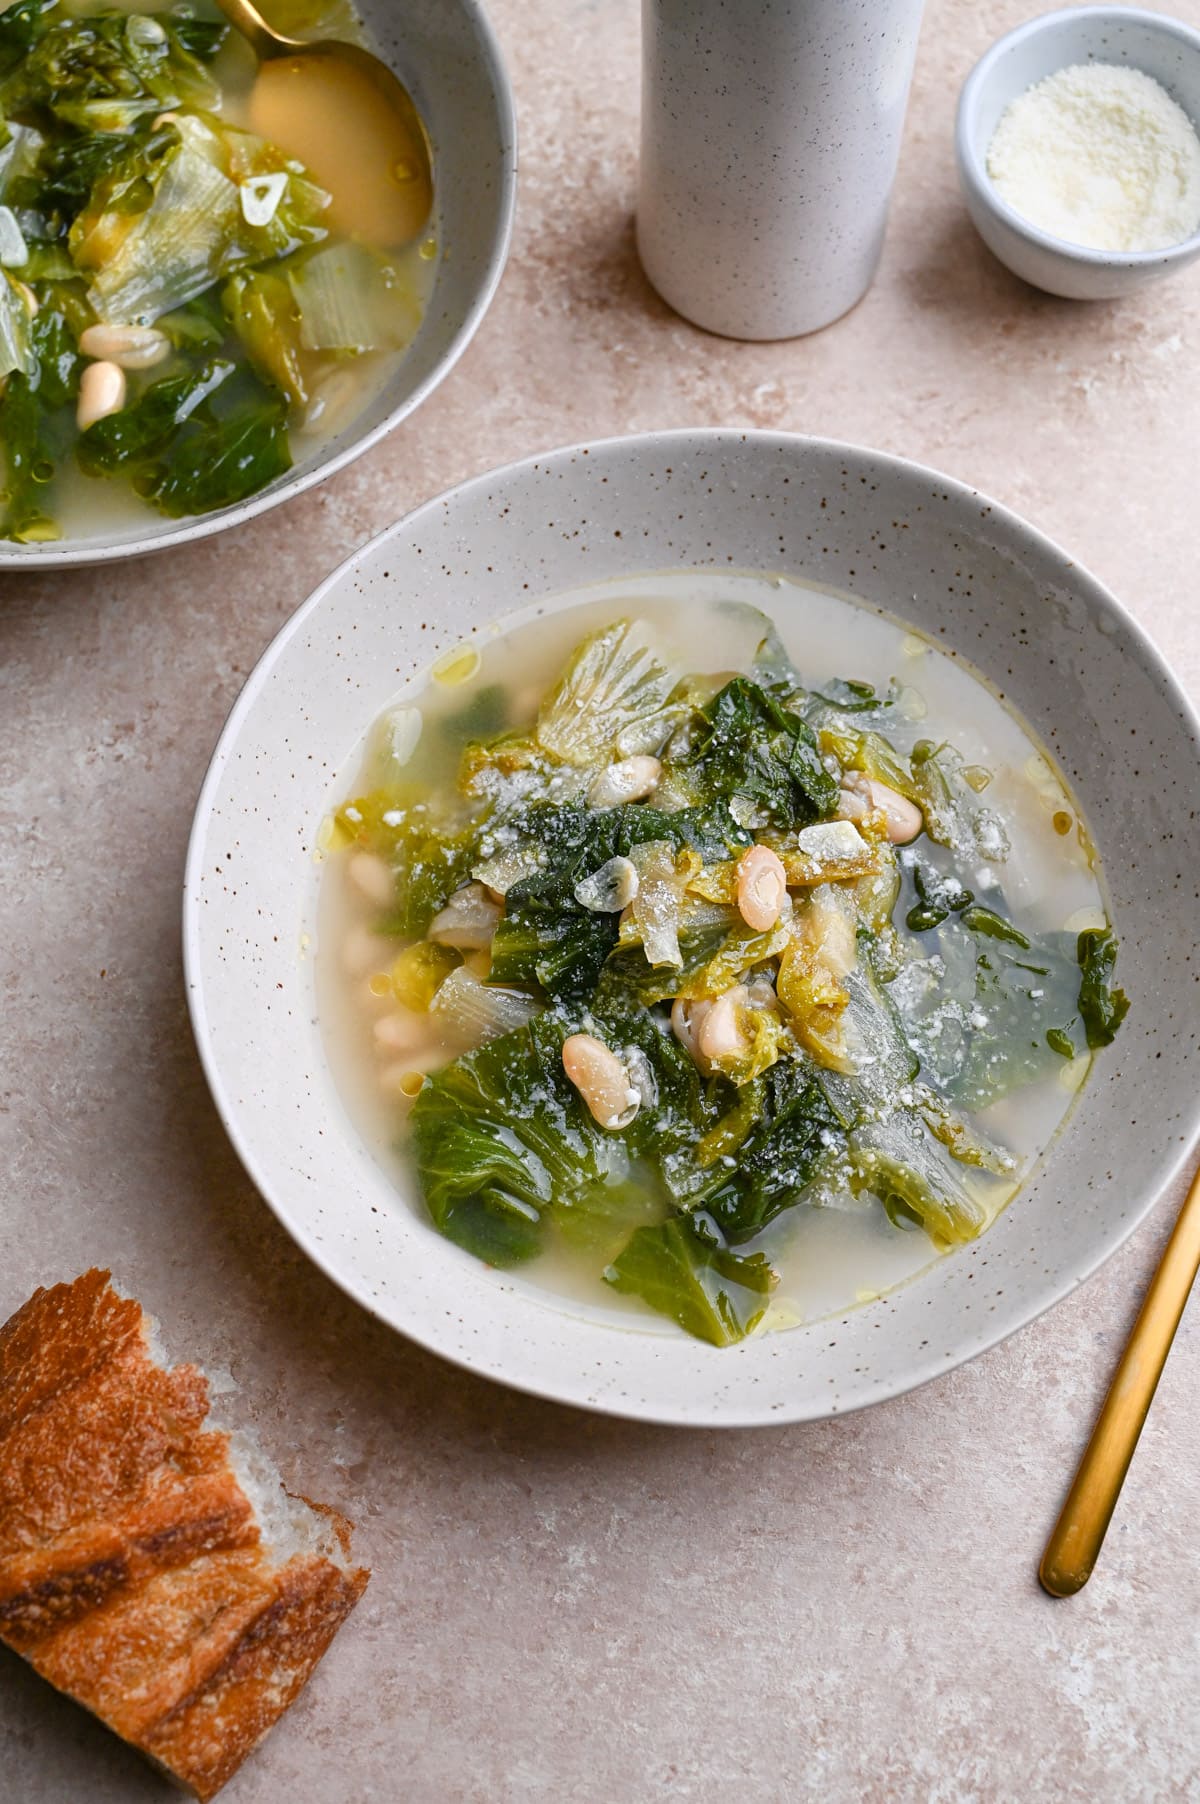 Angled view of two bowls of Escarole and Beans surrounded by parmesan, a spoon and a piece of bread.